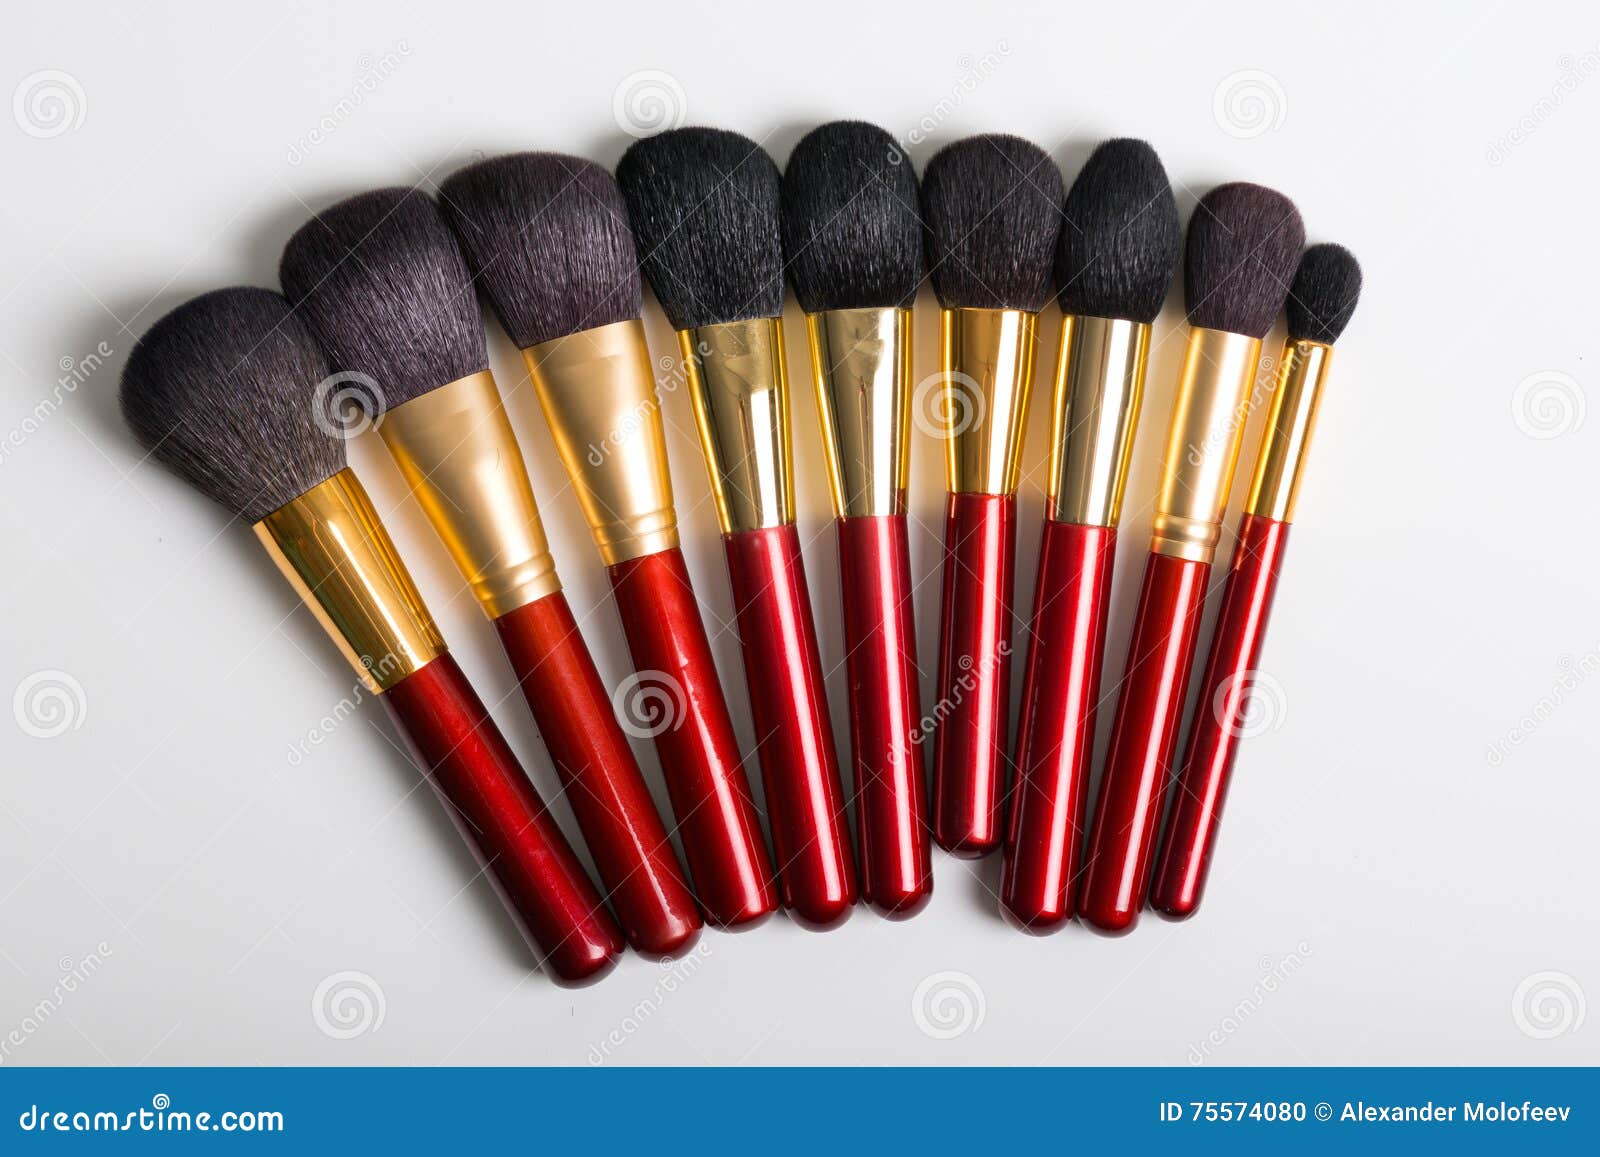 Flat Lay Makeup Brushes On White Background Top View Stock Photo